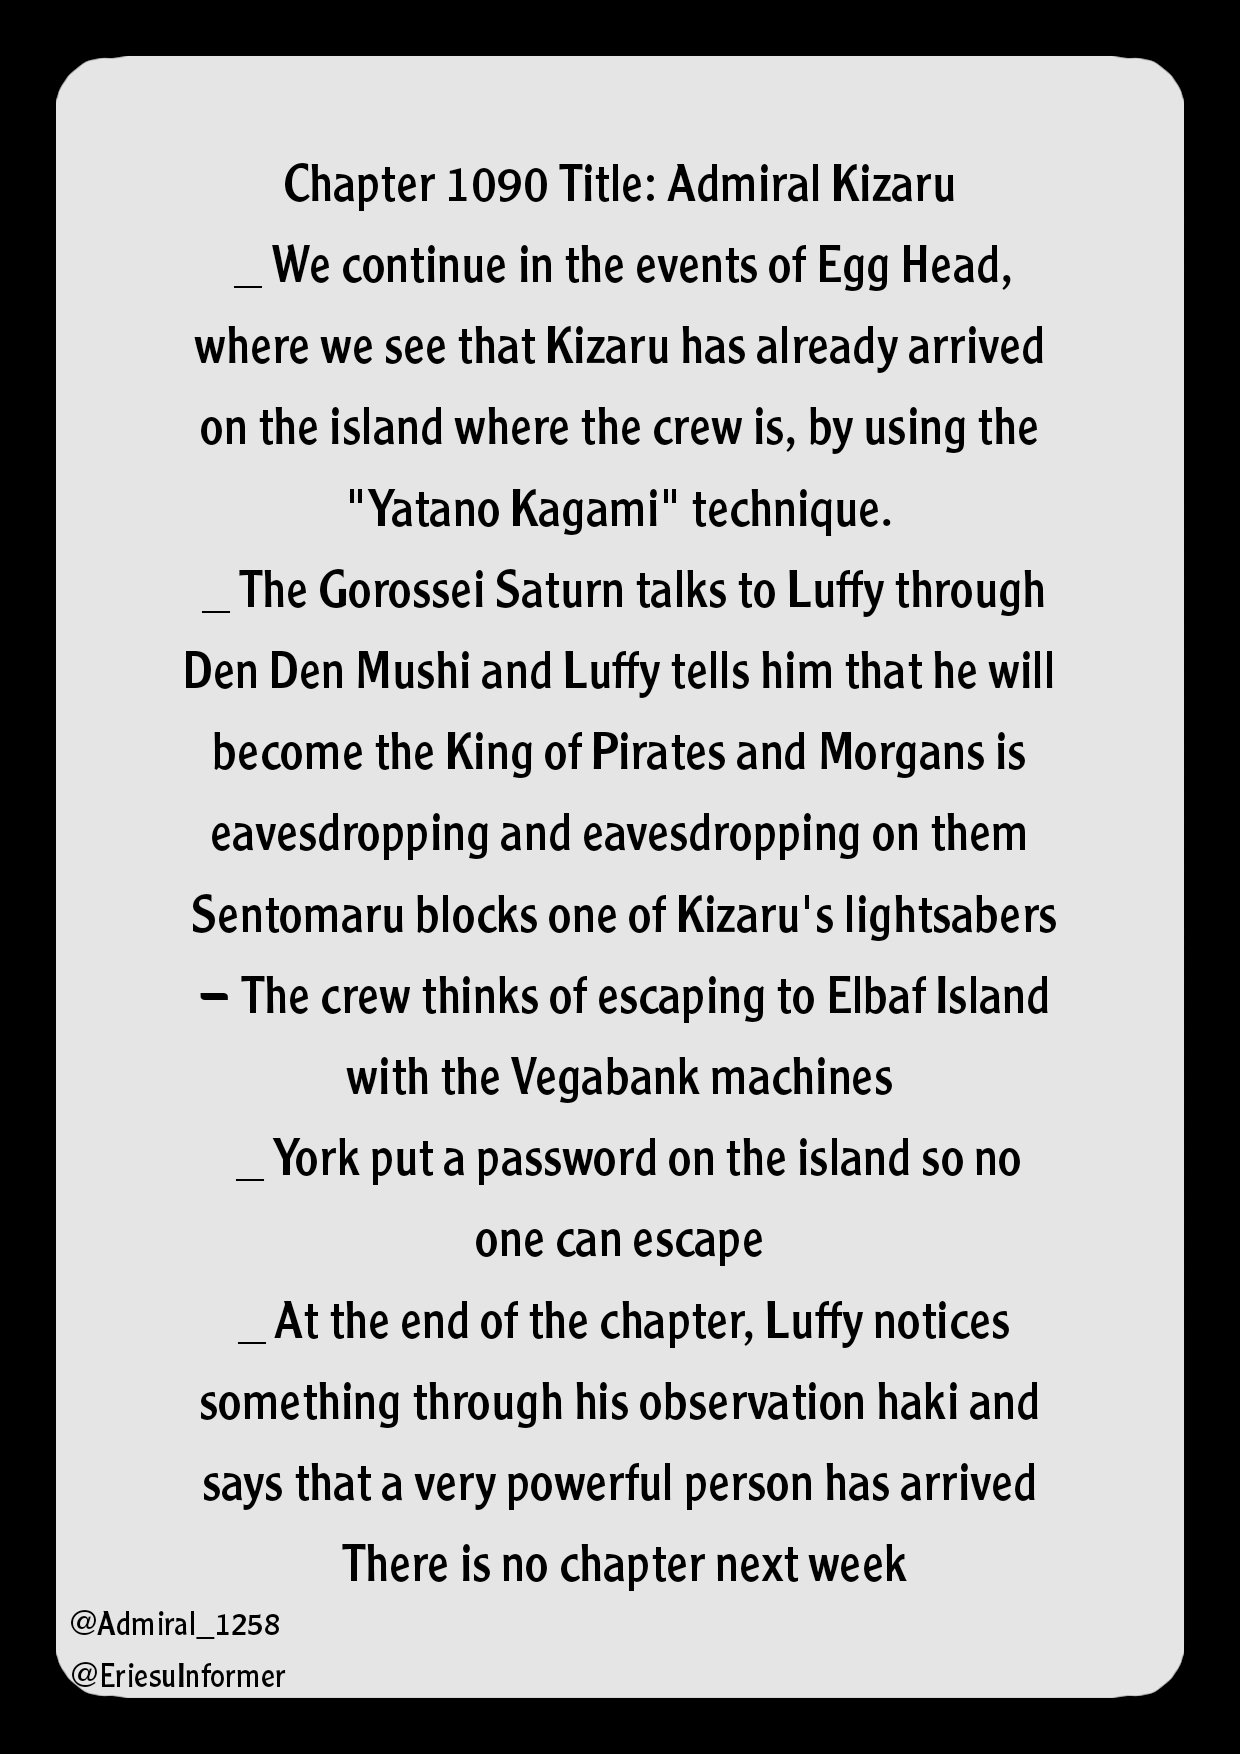 One Piece, ST, Over One Thousand Pieces (unmarked spoilers upon official  chapter release)